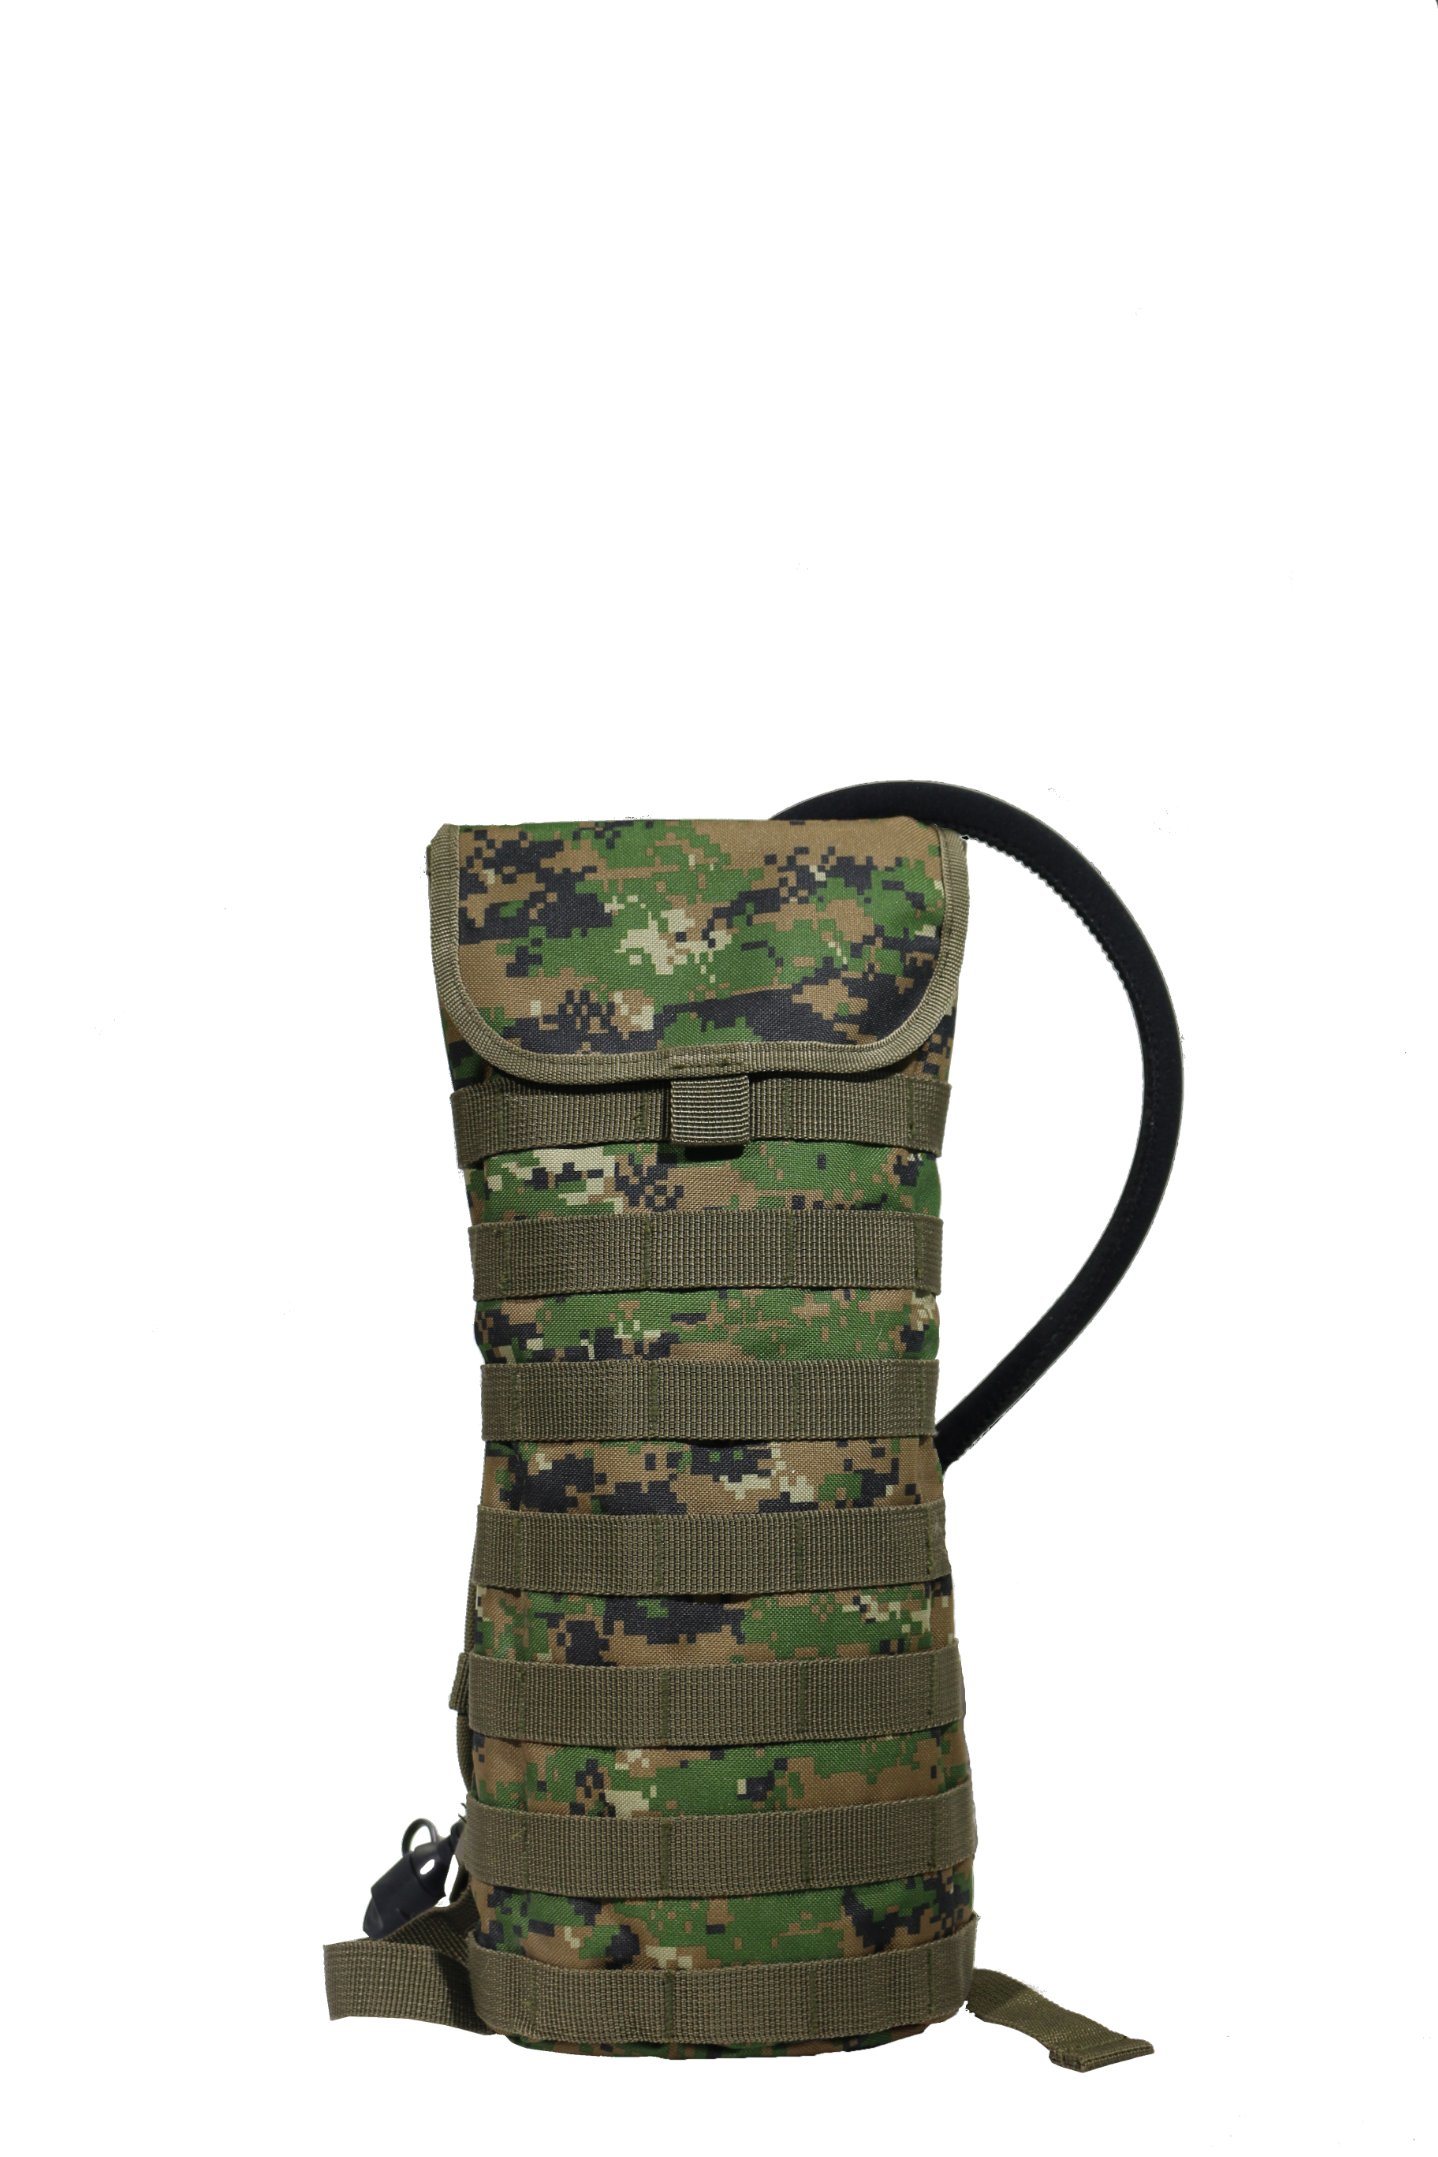 Camouflage Tactical Hydration Backpack Molle Pack with Water Bladder